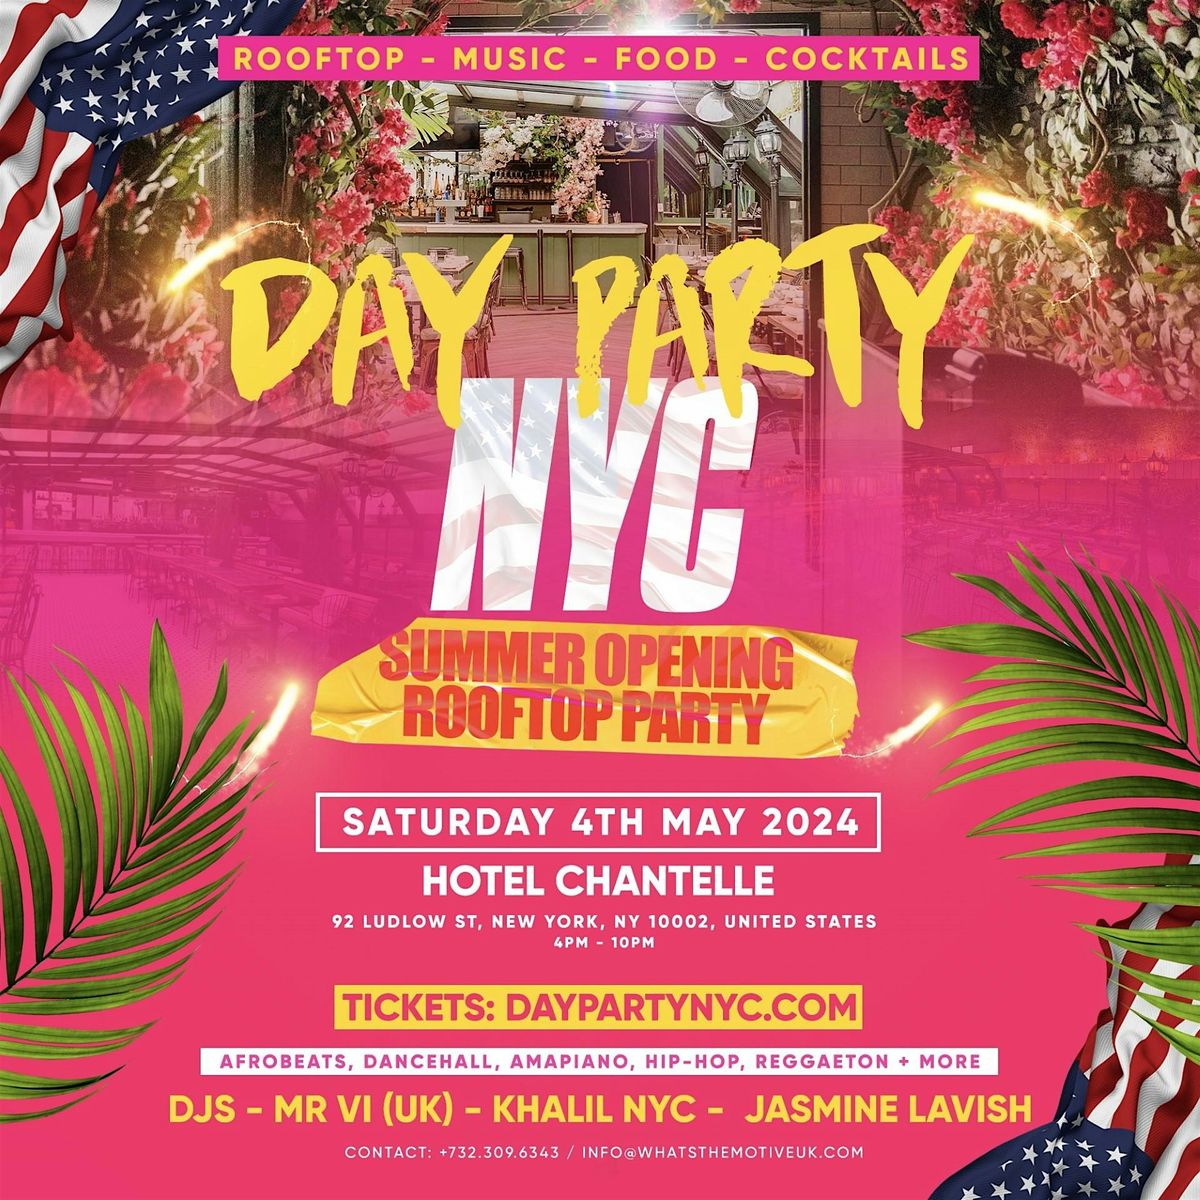 DAY PARTY NYC - New York's Biggest Rooftop Day Party